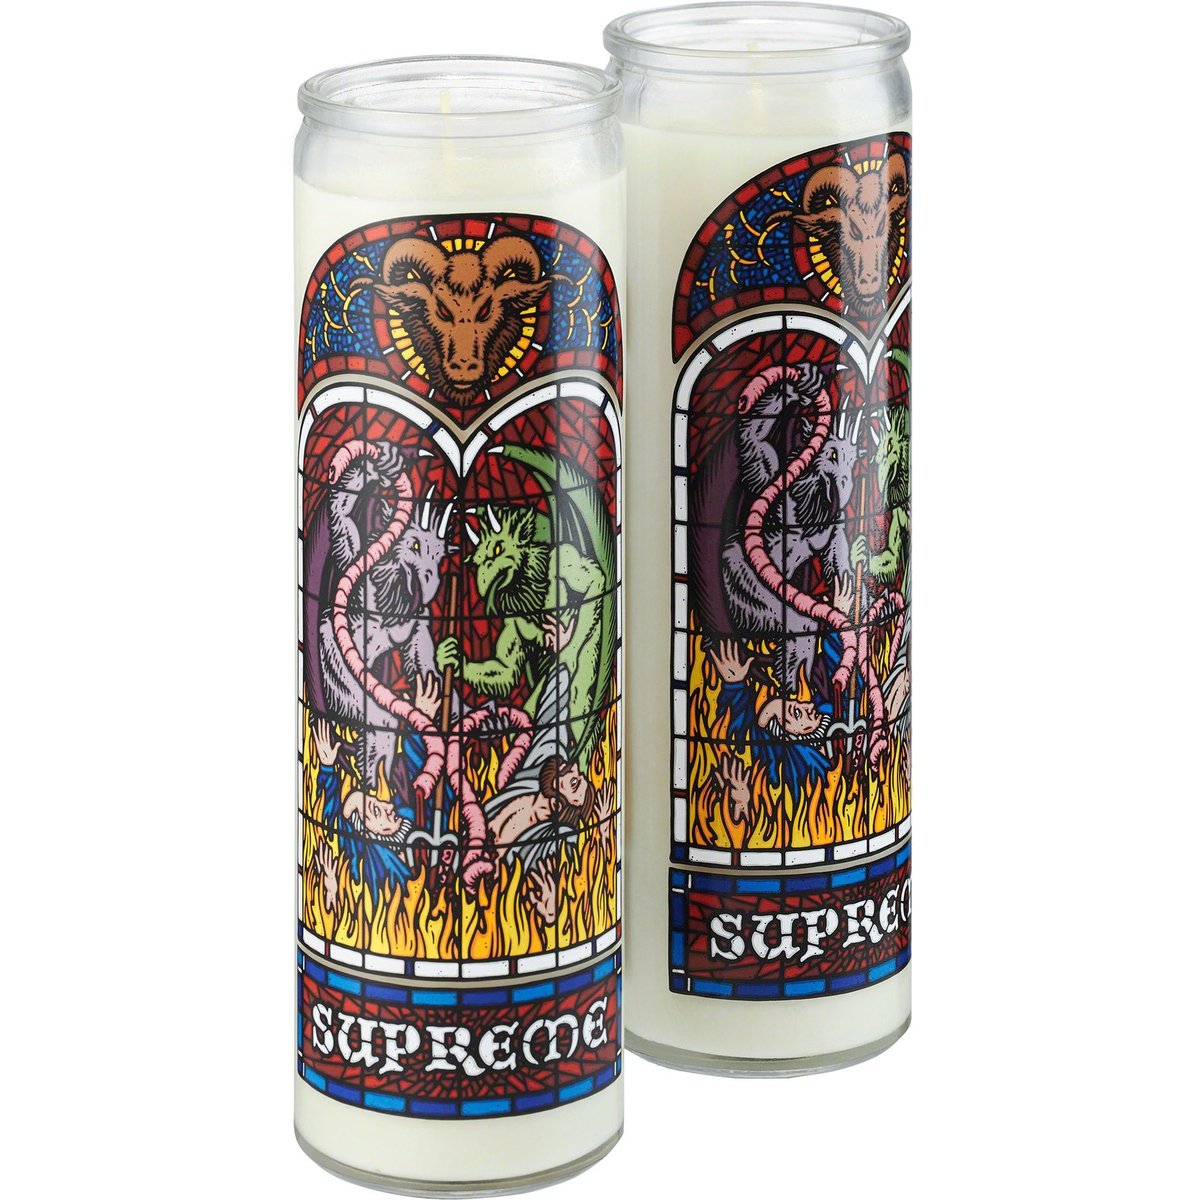 Supreme Prayer Candle released during fall winter 23 season